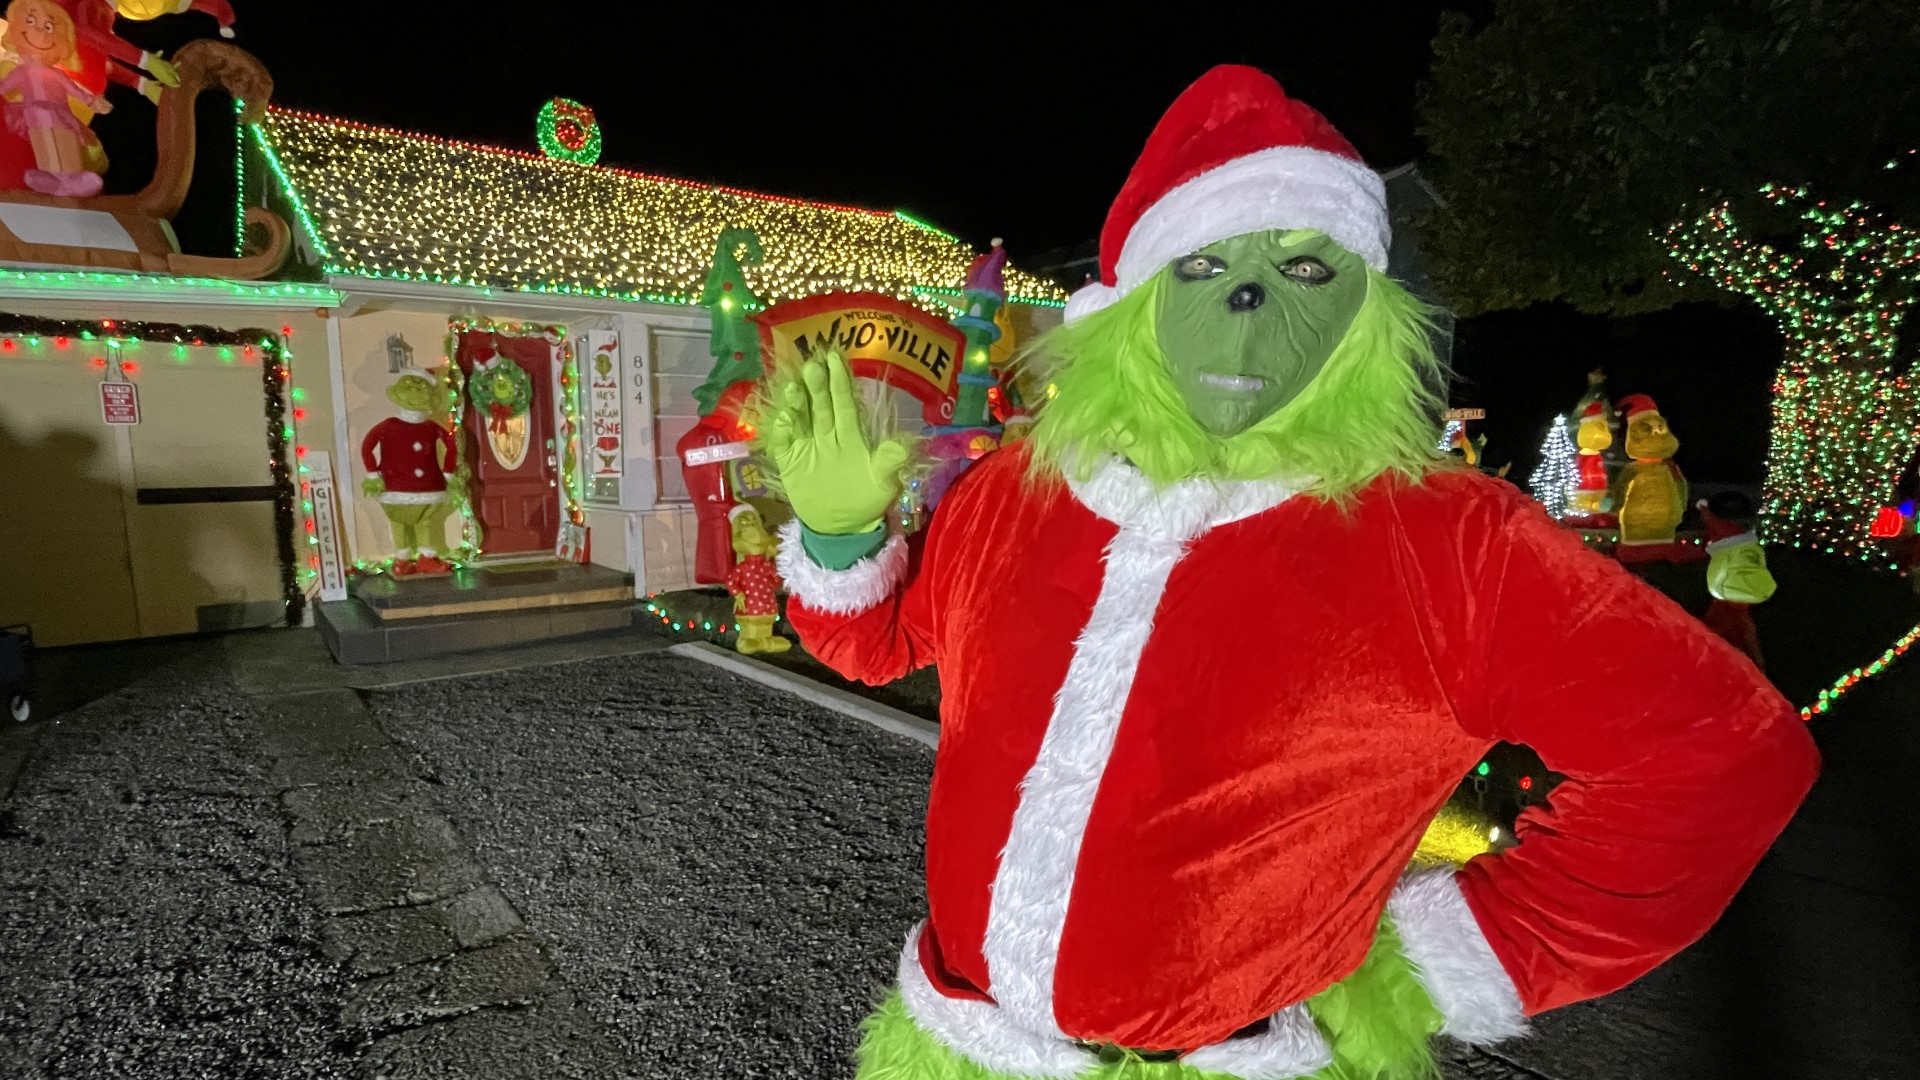 Shawn Haines celebrates the holiday season by going full-on Grinch and it's a true delight! #k5evening